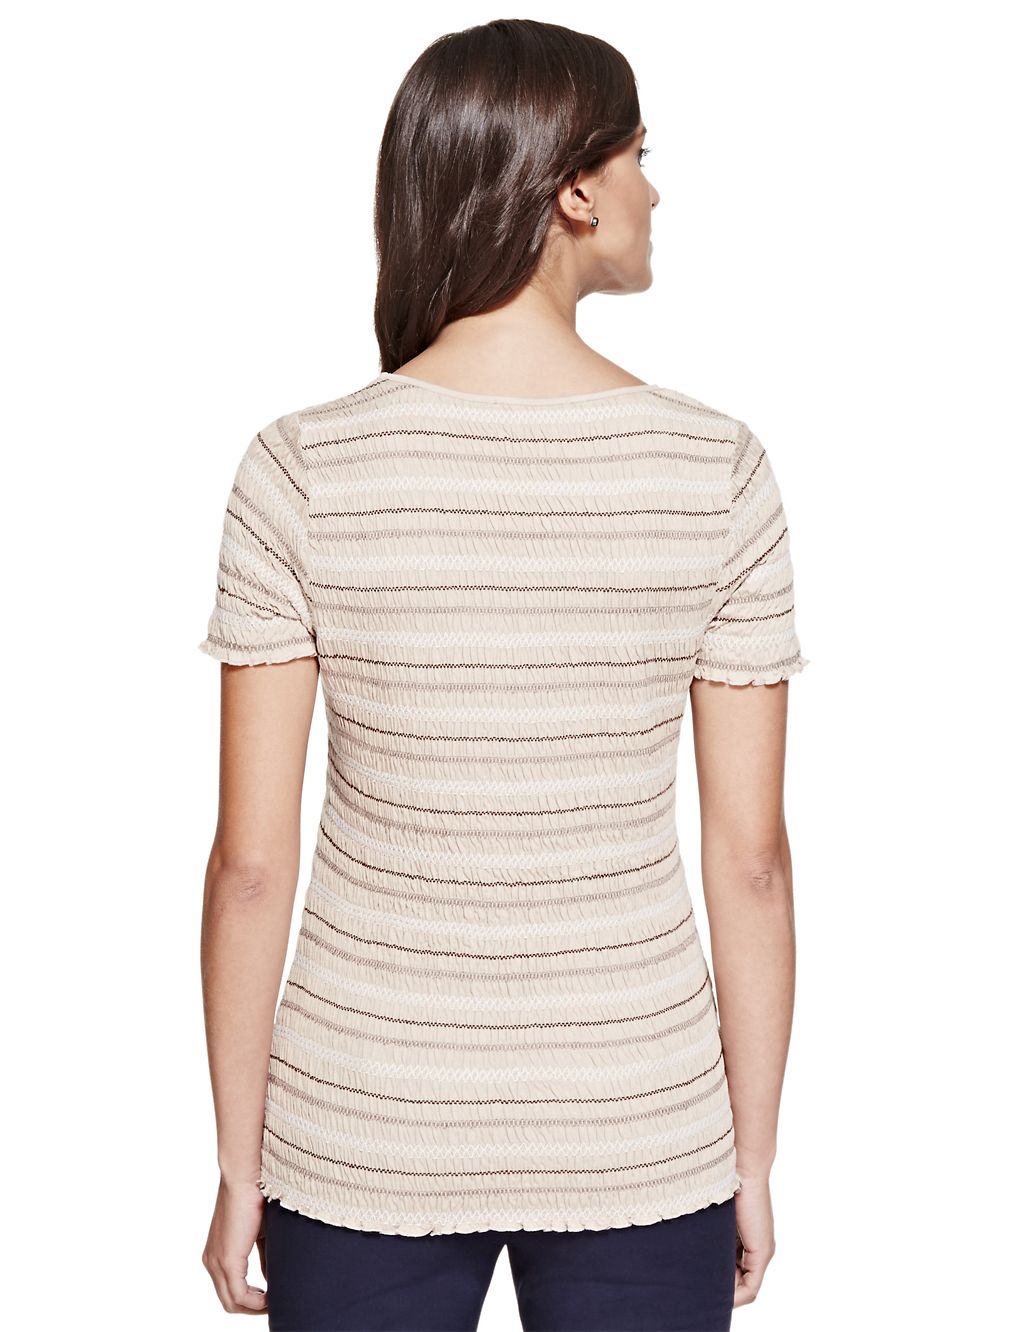 Embroidered Striped Top with Modal 5 of 5